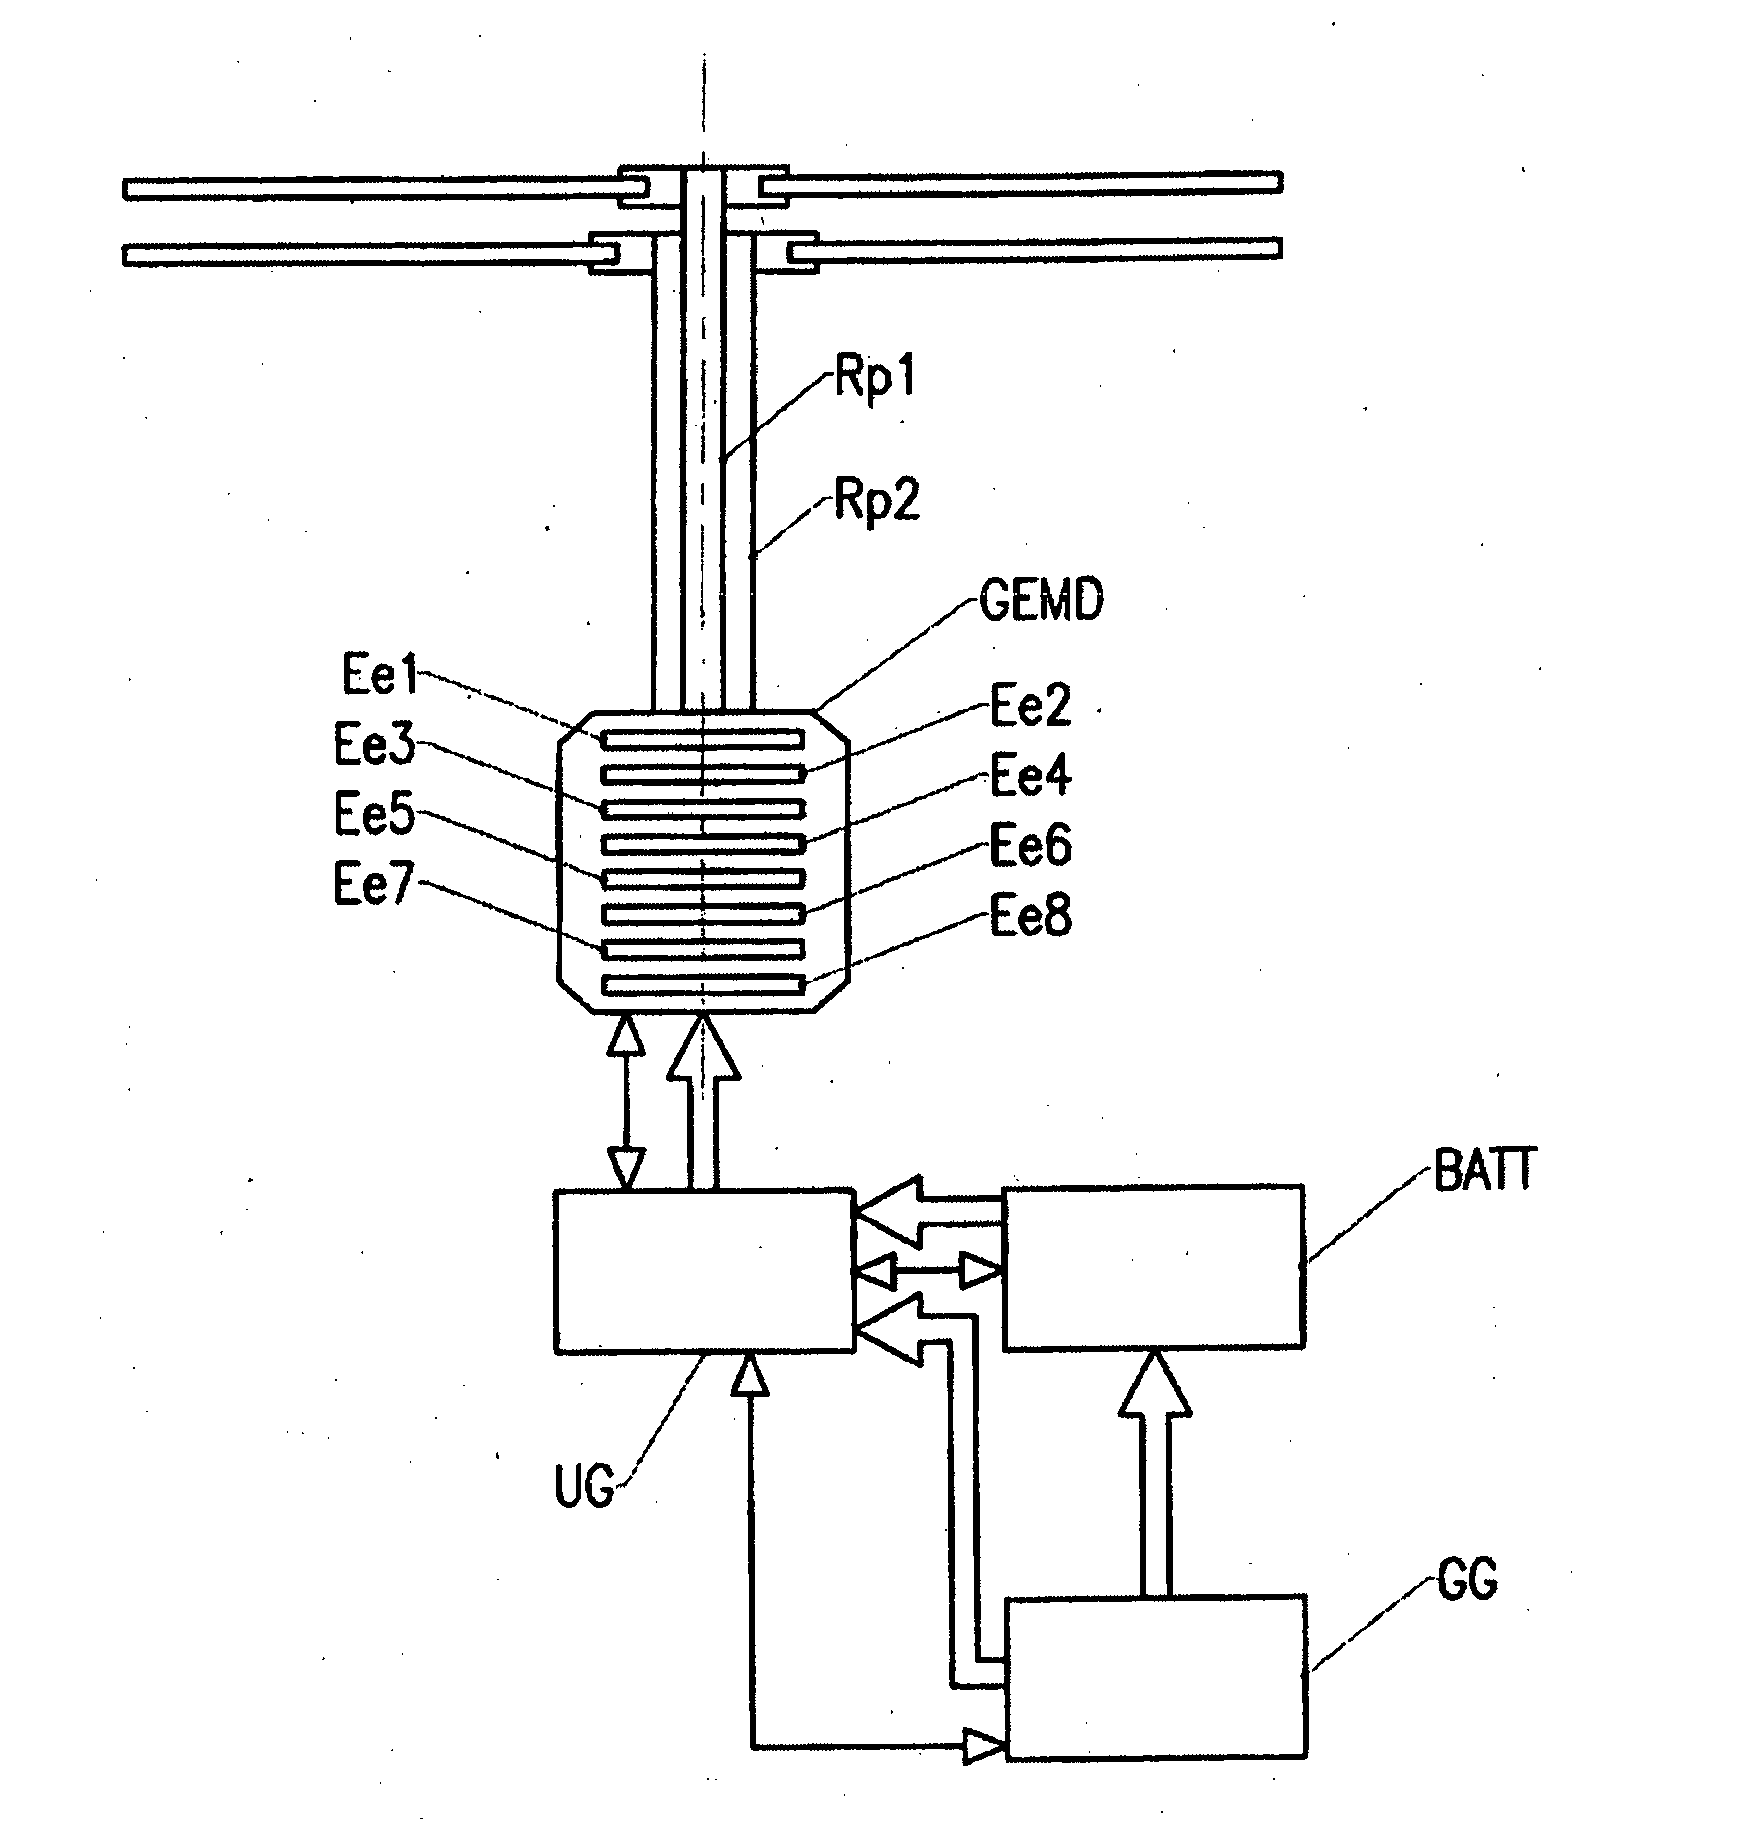 Electromagnetic power transmission for a rotary-wing aircraft or a fixed-wing aircraft